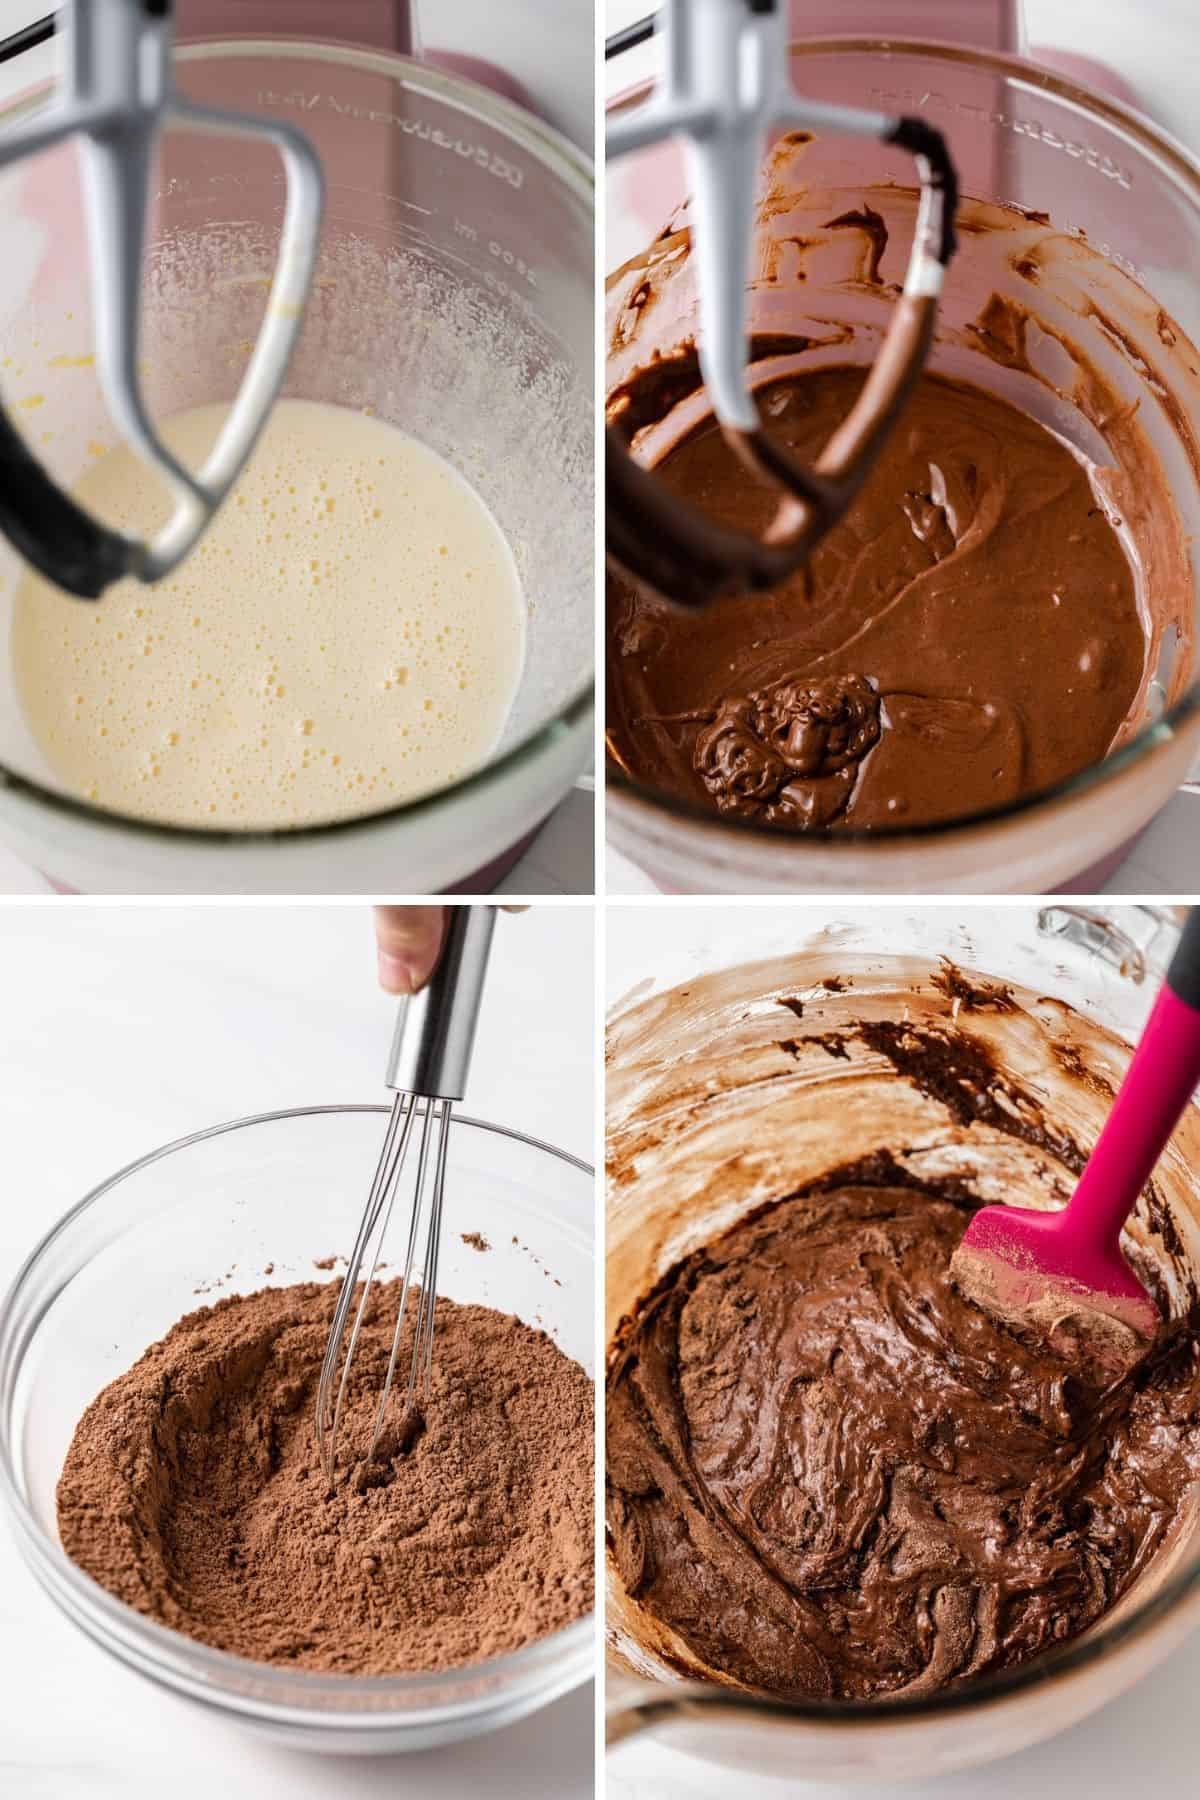 eggs beaten with sugar in stand mixer, chocolate added to egg mixture, dry ingredients stirred together with whisk in glass bowl, and thick chocolate cookie dough in glass bowl with pink spatula